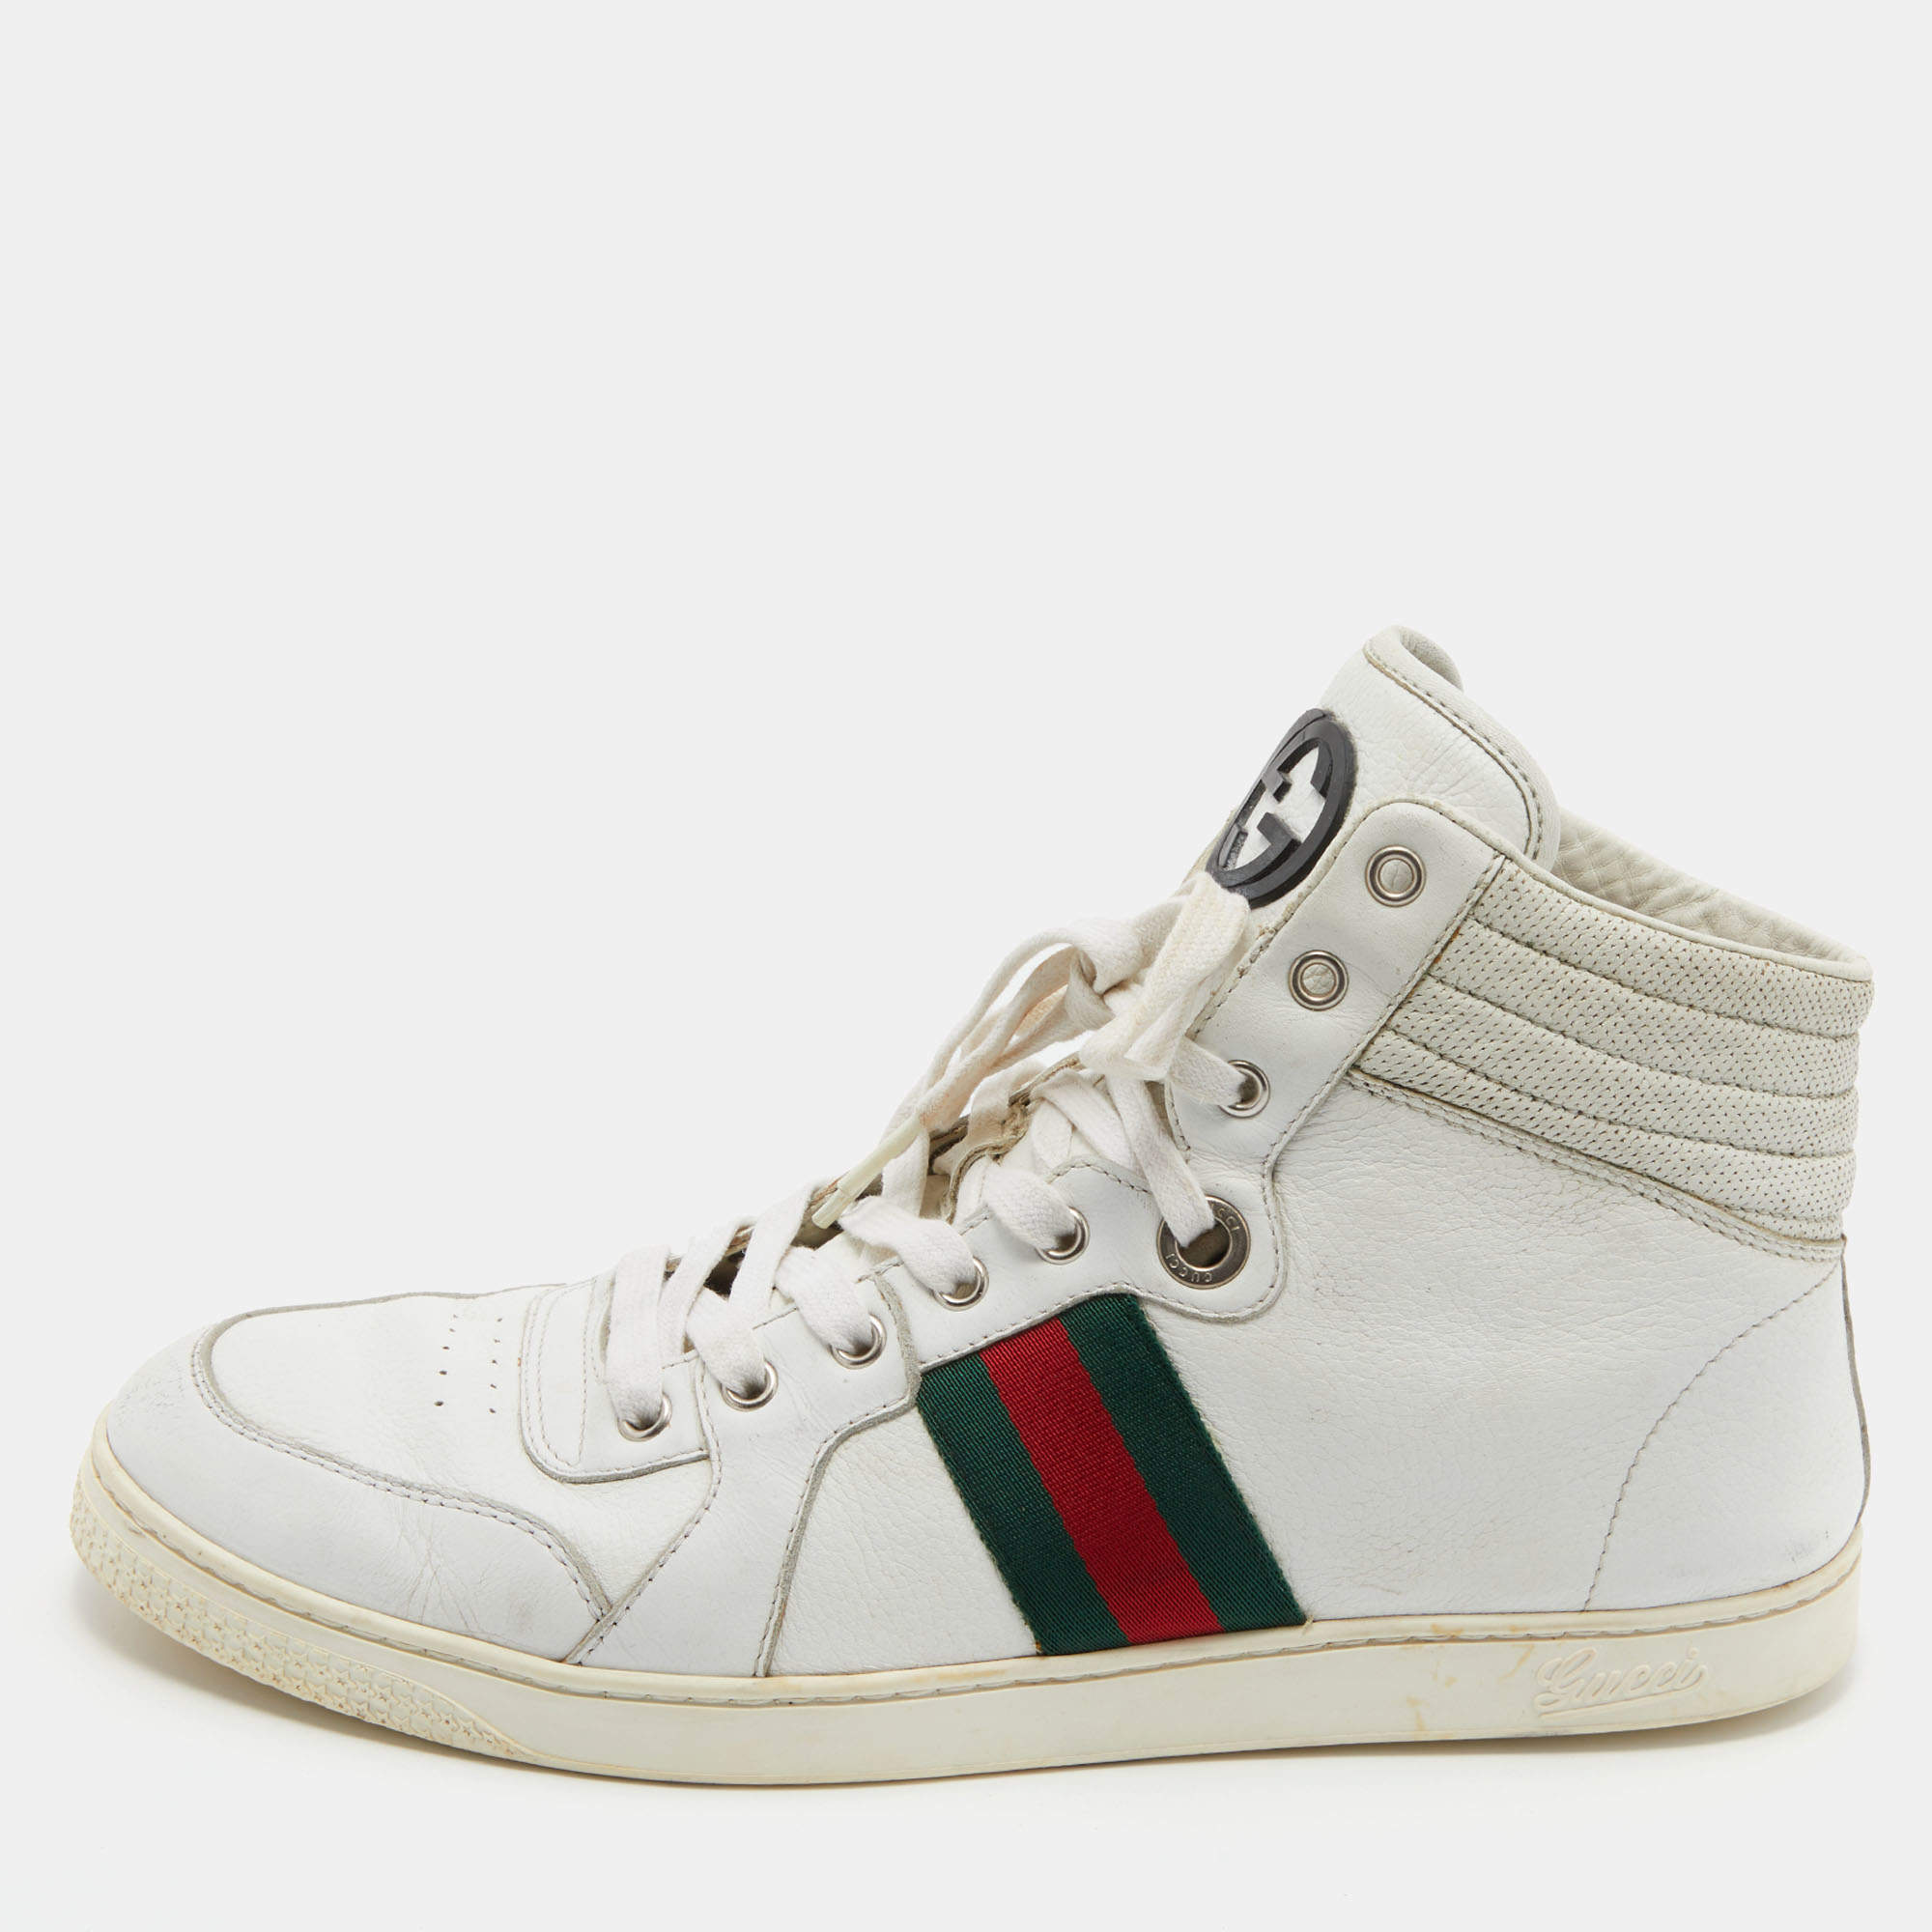 luxury-men-gucci-used-shoes-p776238-010.jpg